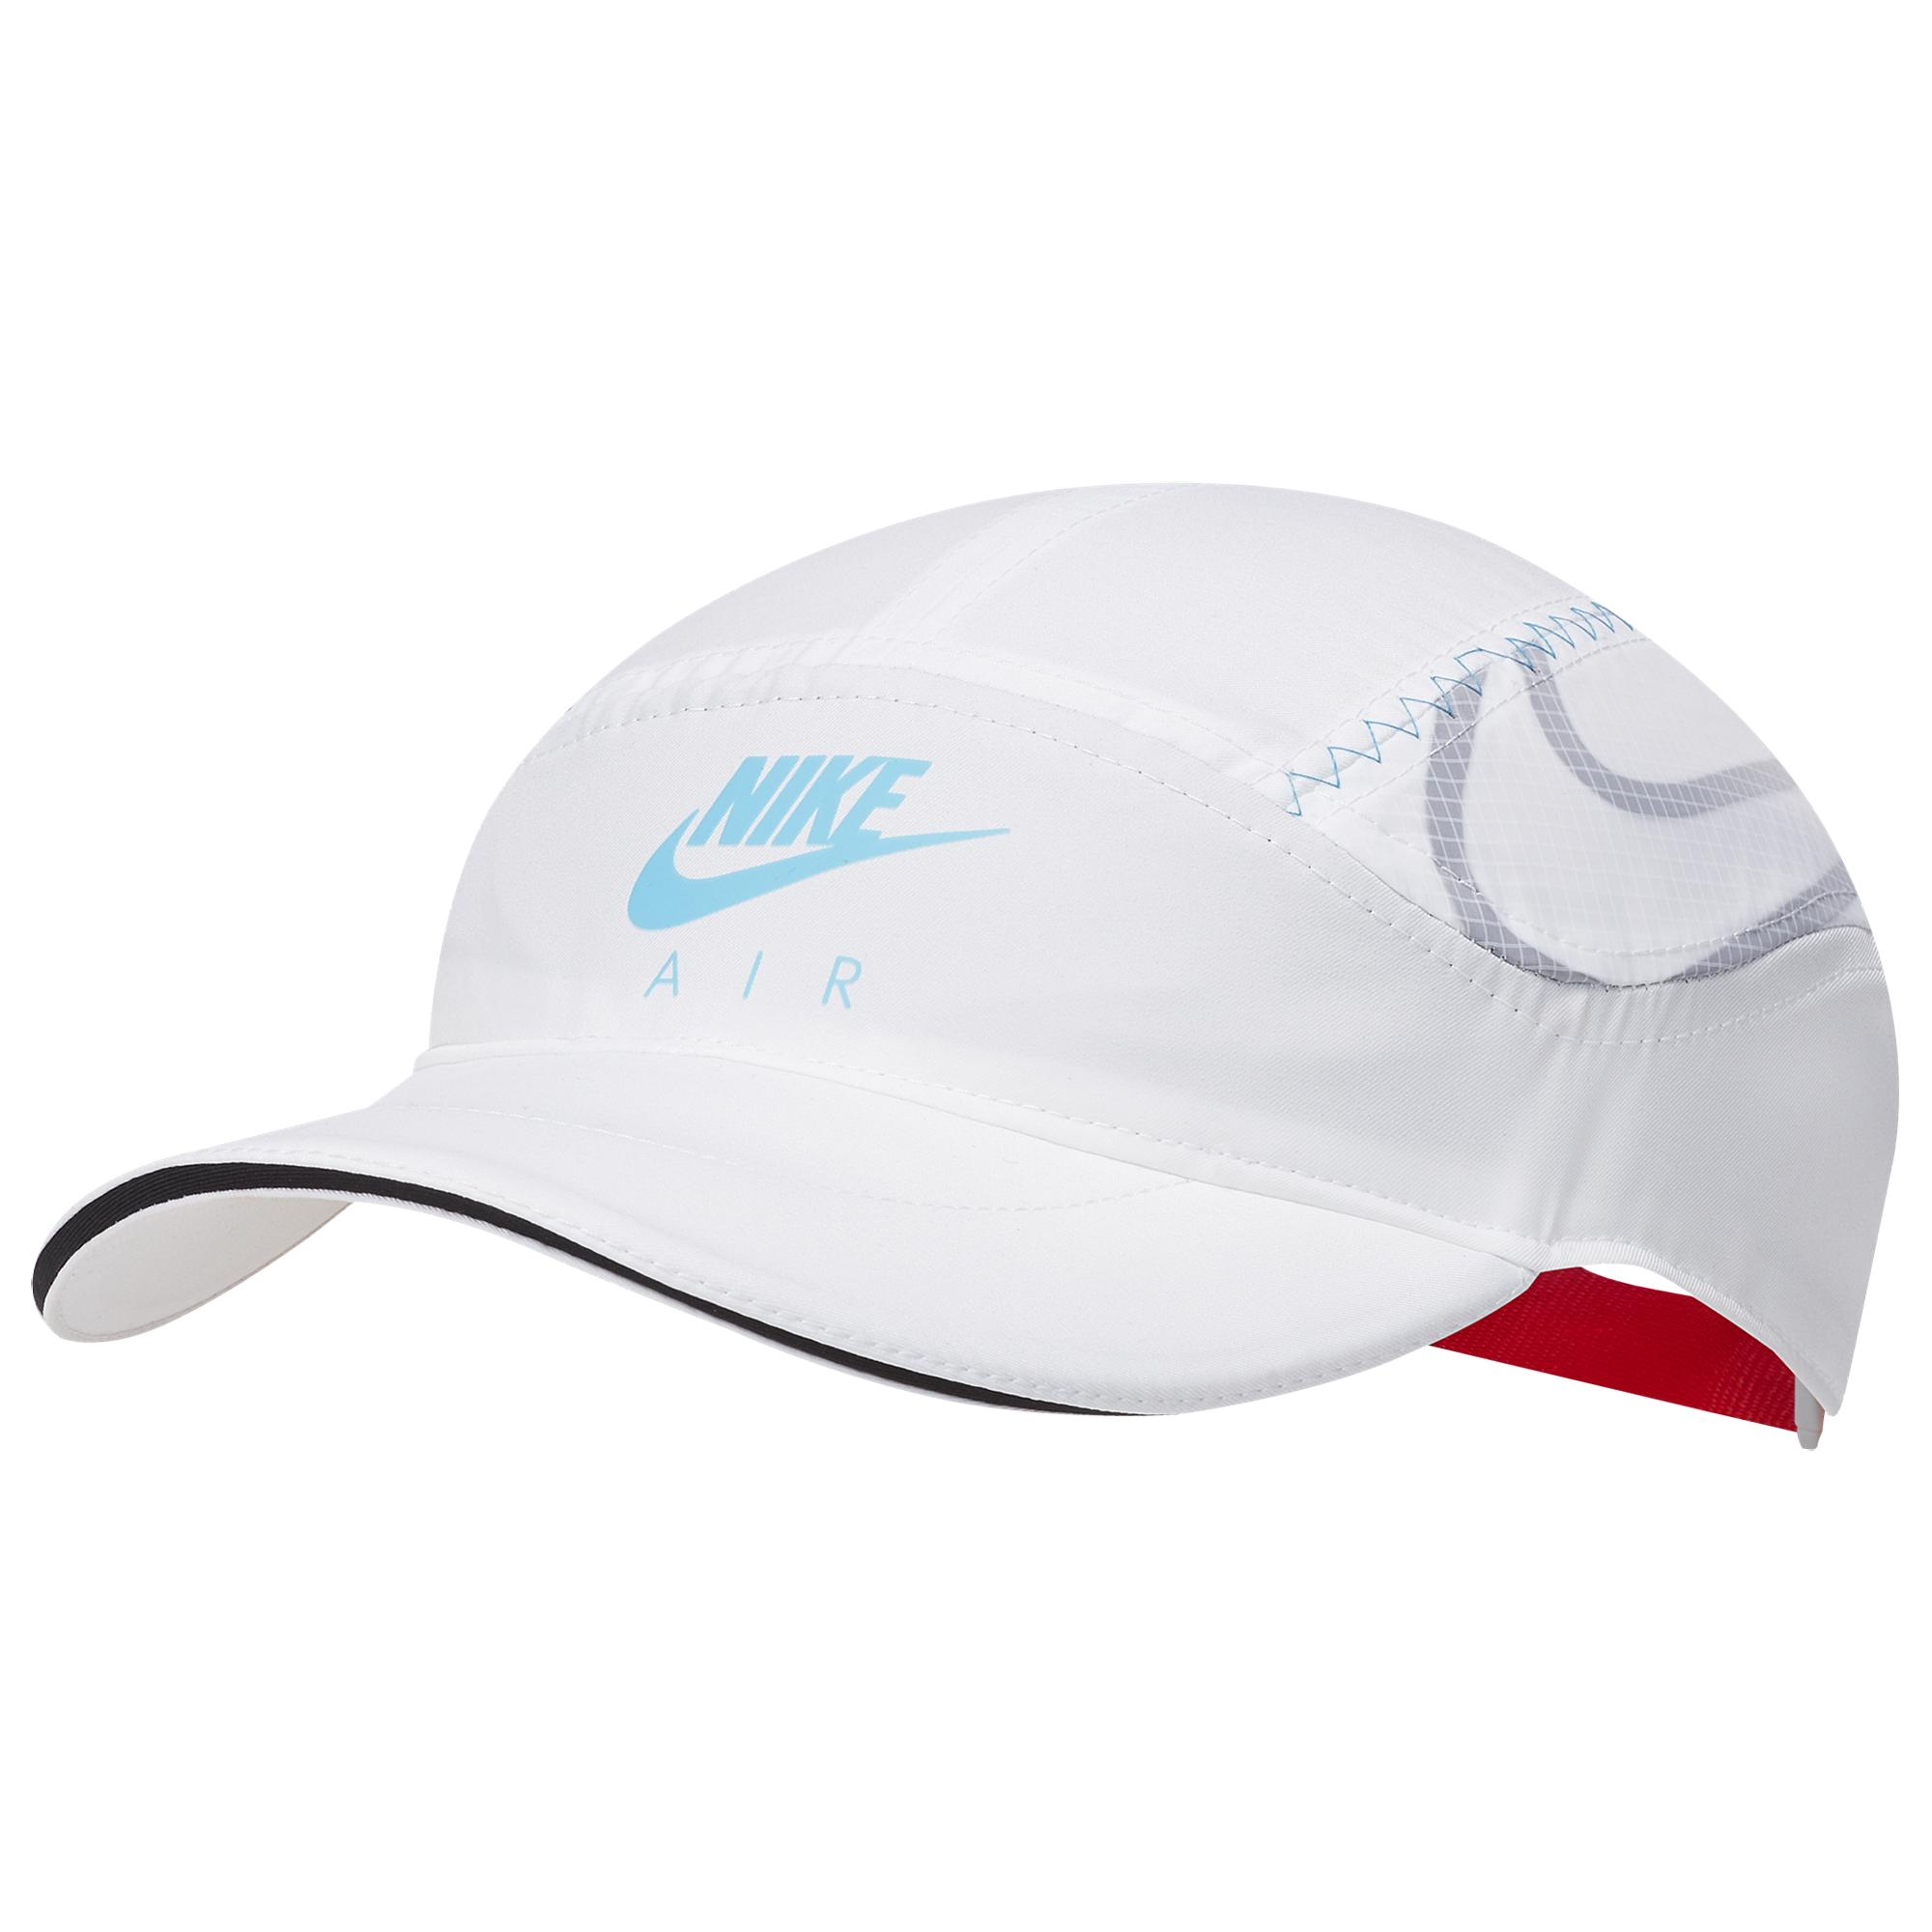 Nike Synthetic Tailwind Am2090 Cap in 